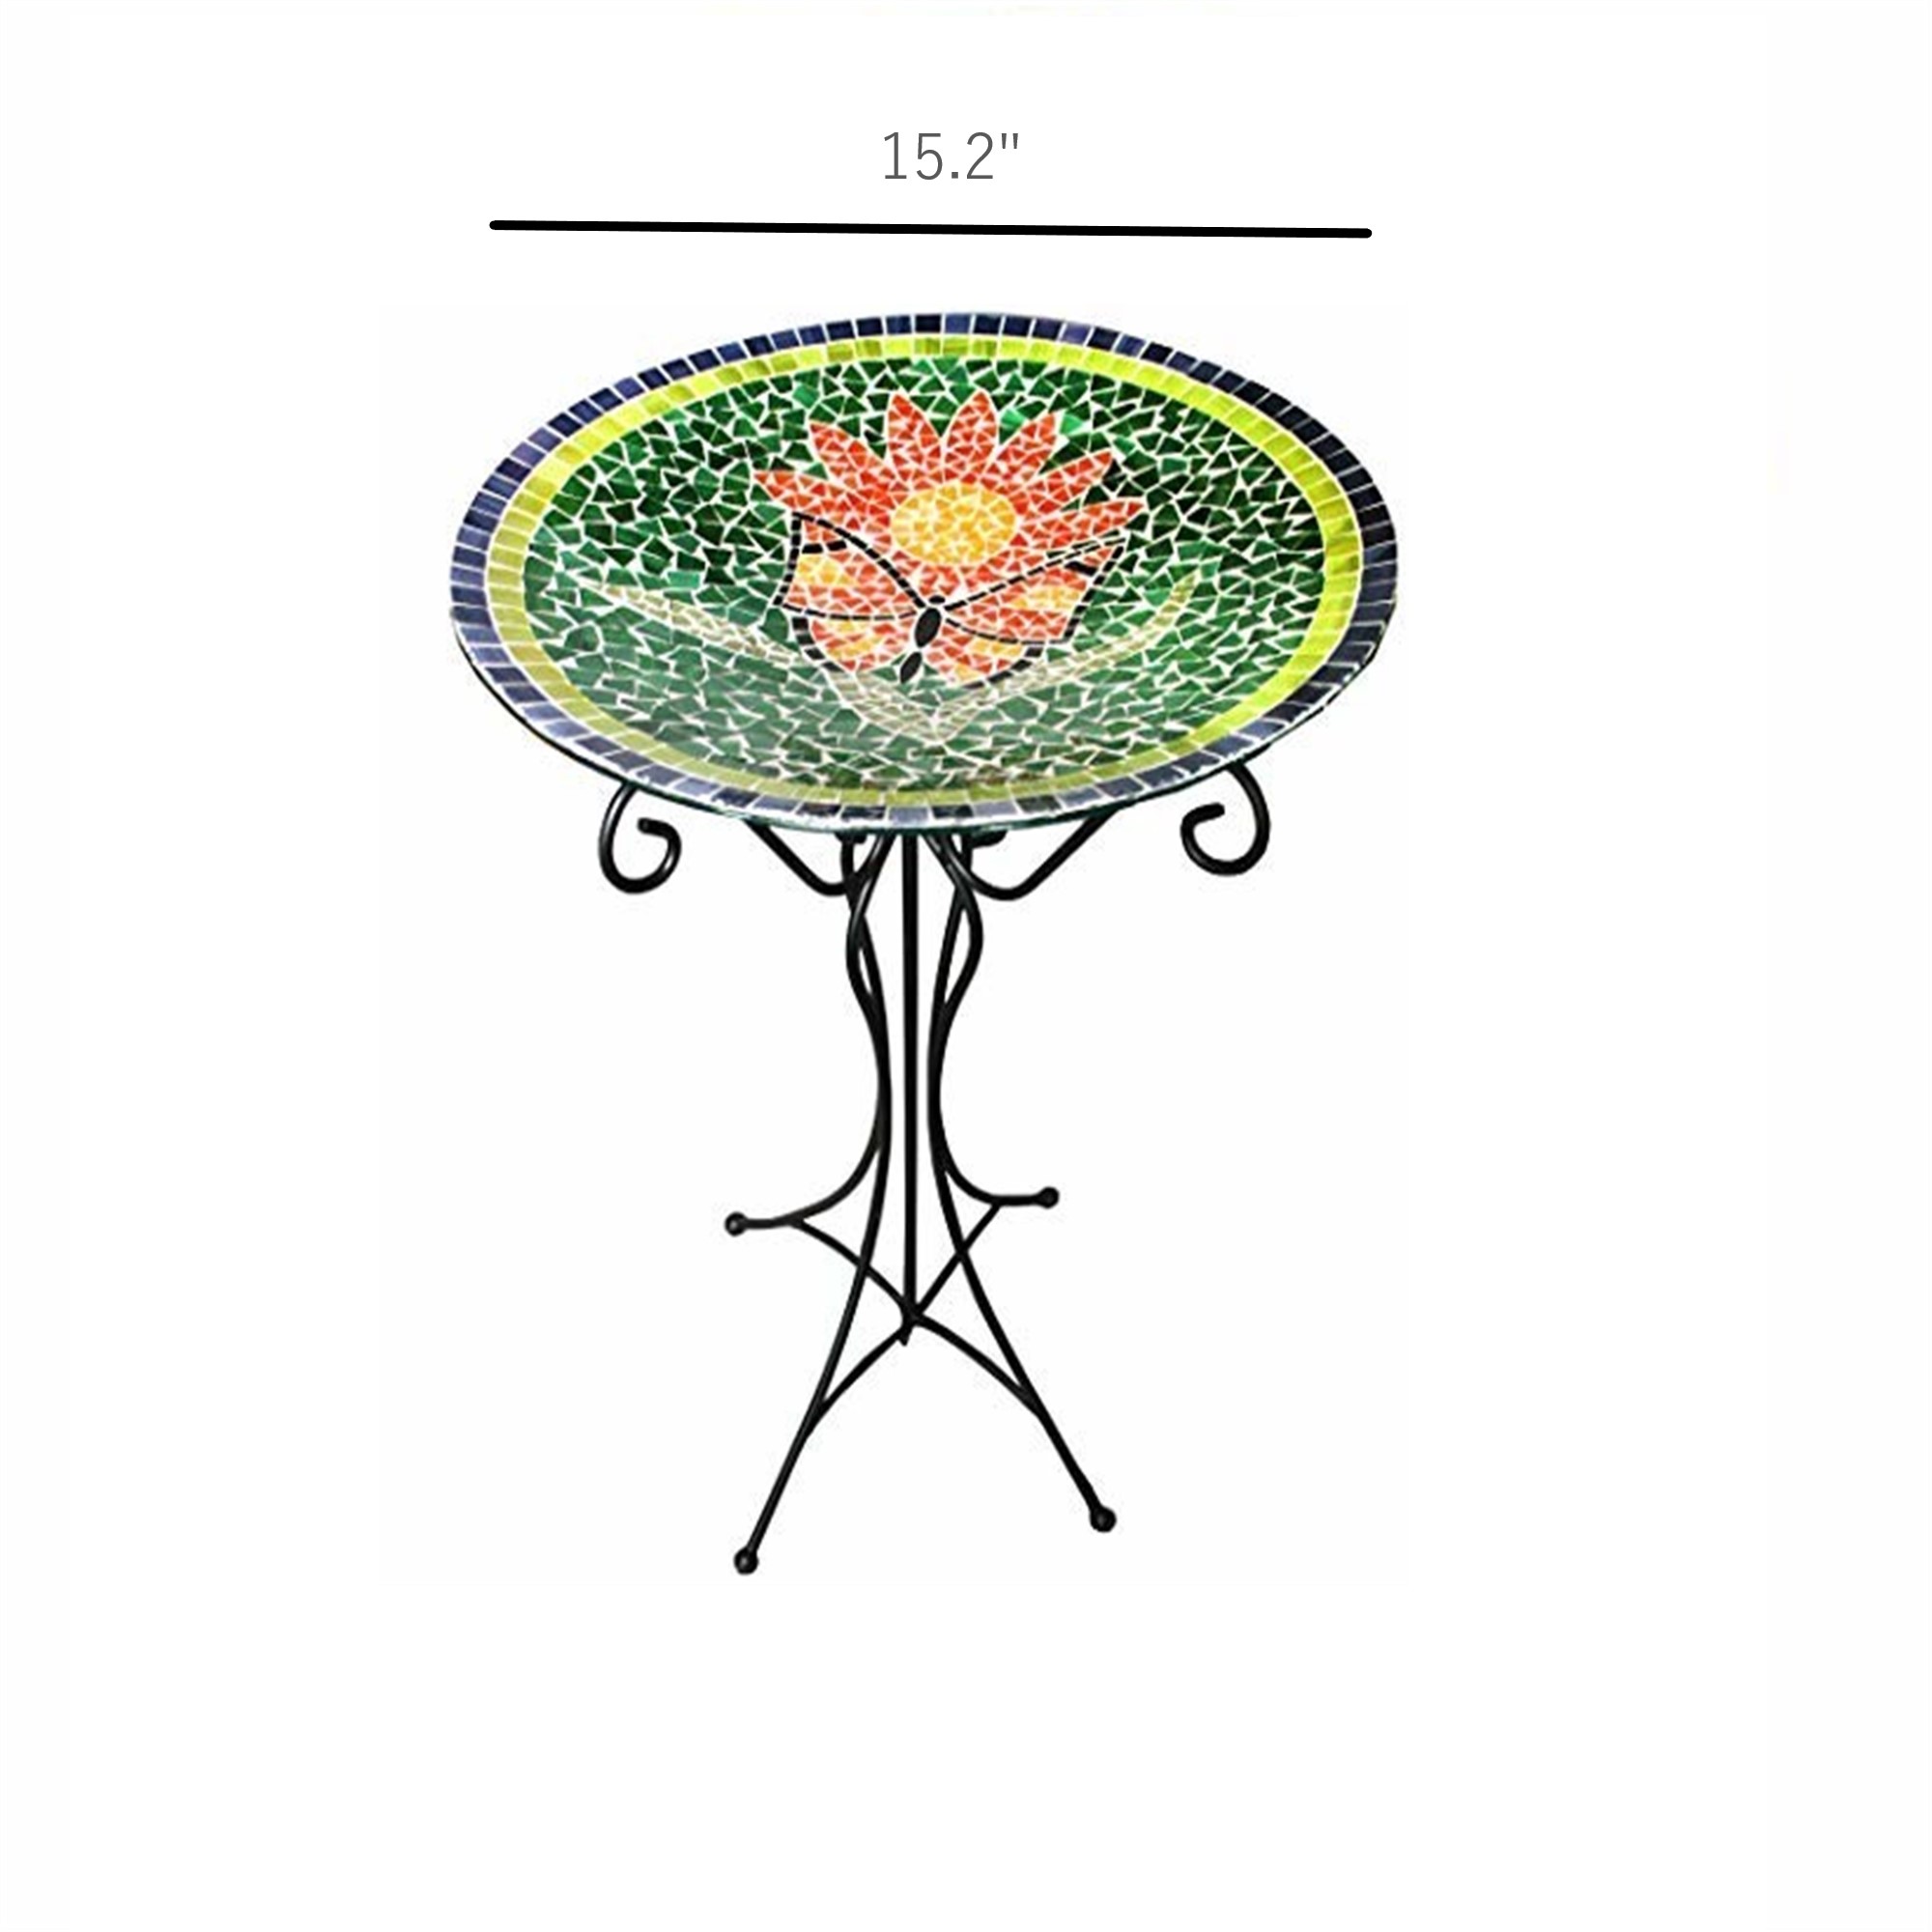 Gardener's Select Butterfly Mosaic Glass Bird Bath and Stand - image 2 of 2